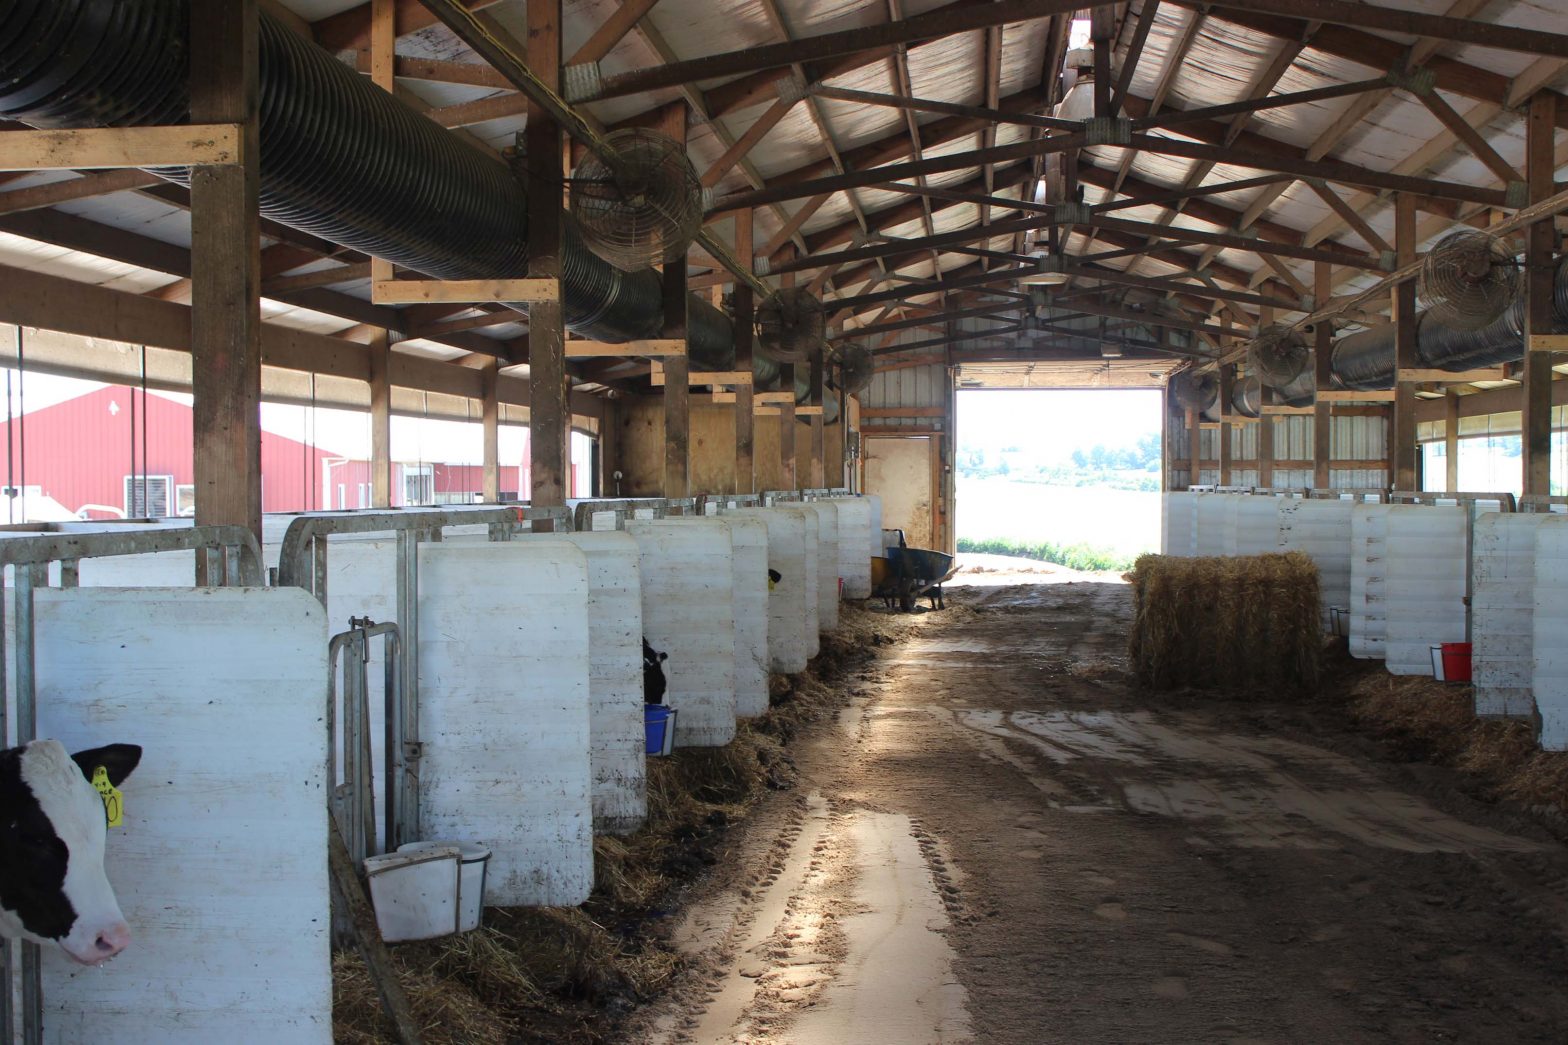 For several years, heifer calves at Holland Cattle Co. have been raised in this calf barn.  They’ll spend about two months here before moving to an offsite heifer barn.